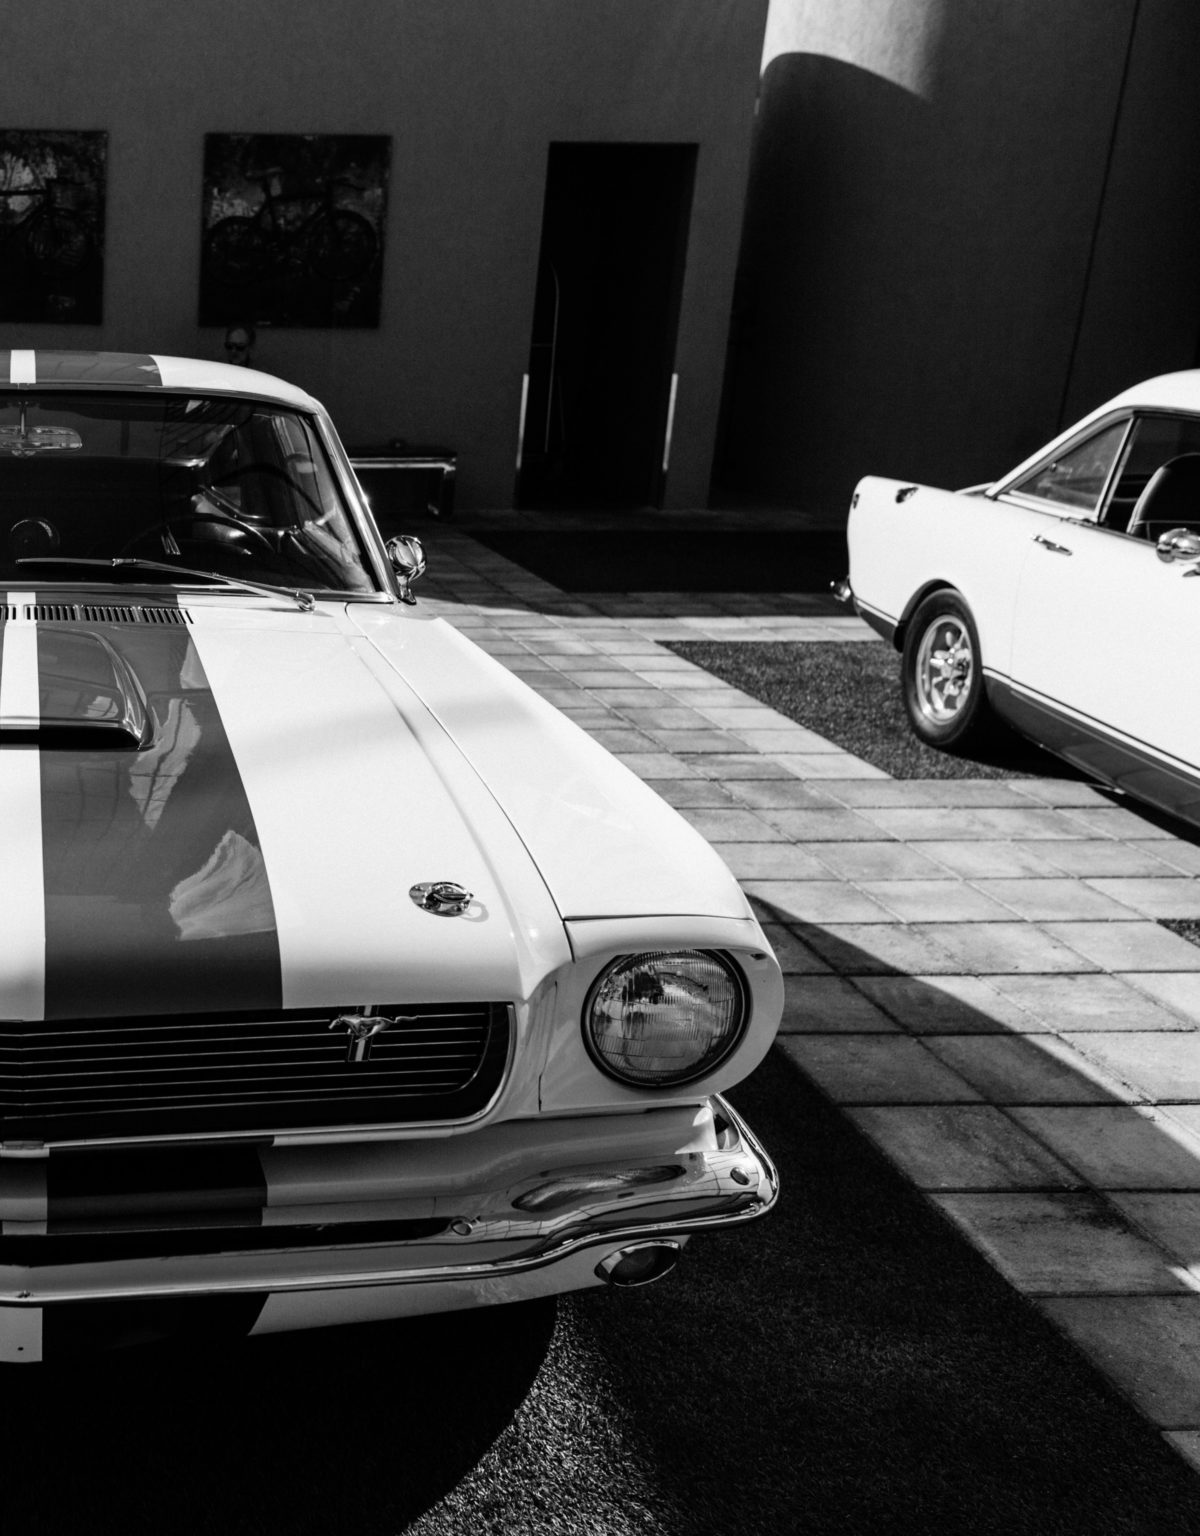 a mustang restored to perfection parked on a tiled ground next to another old car